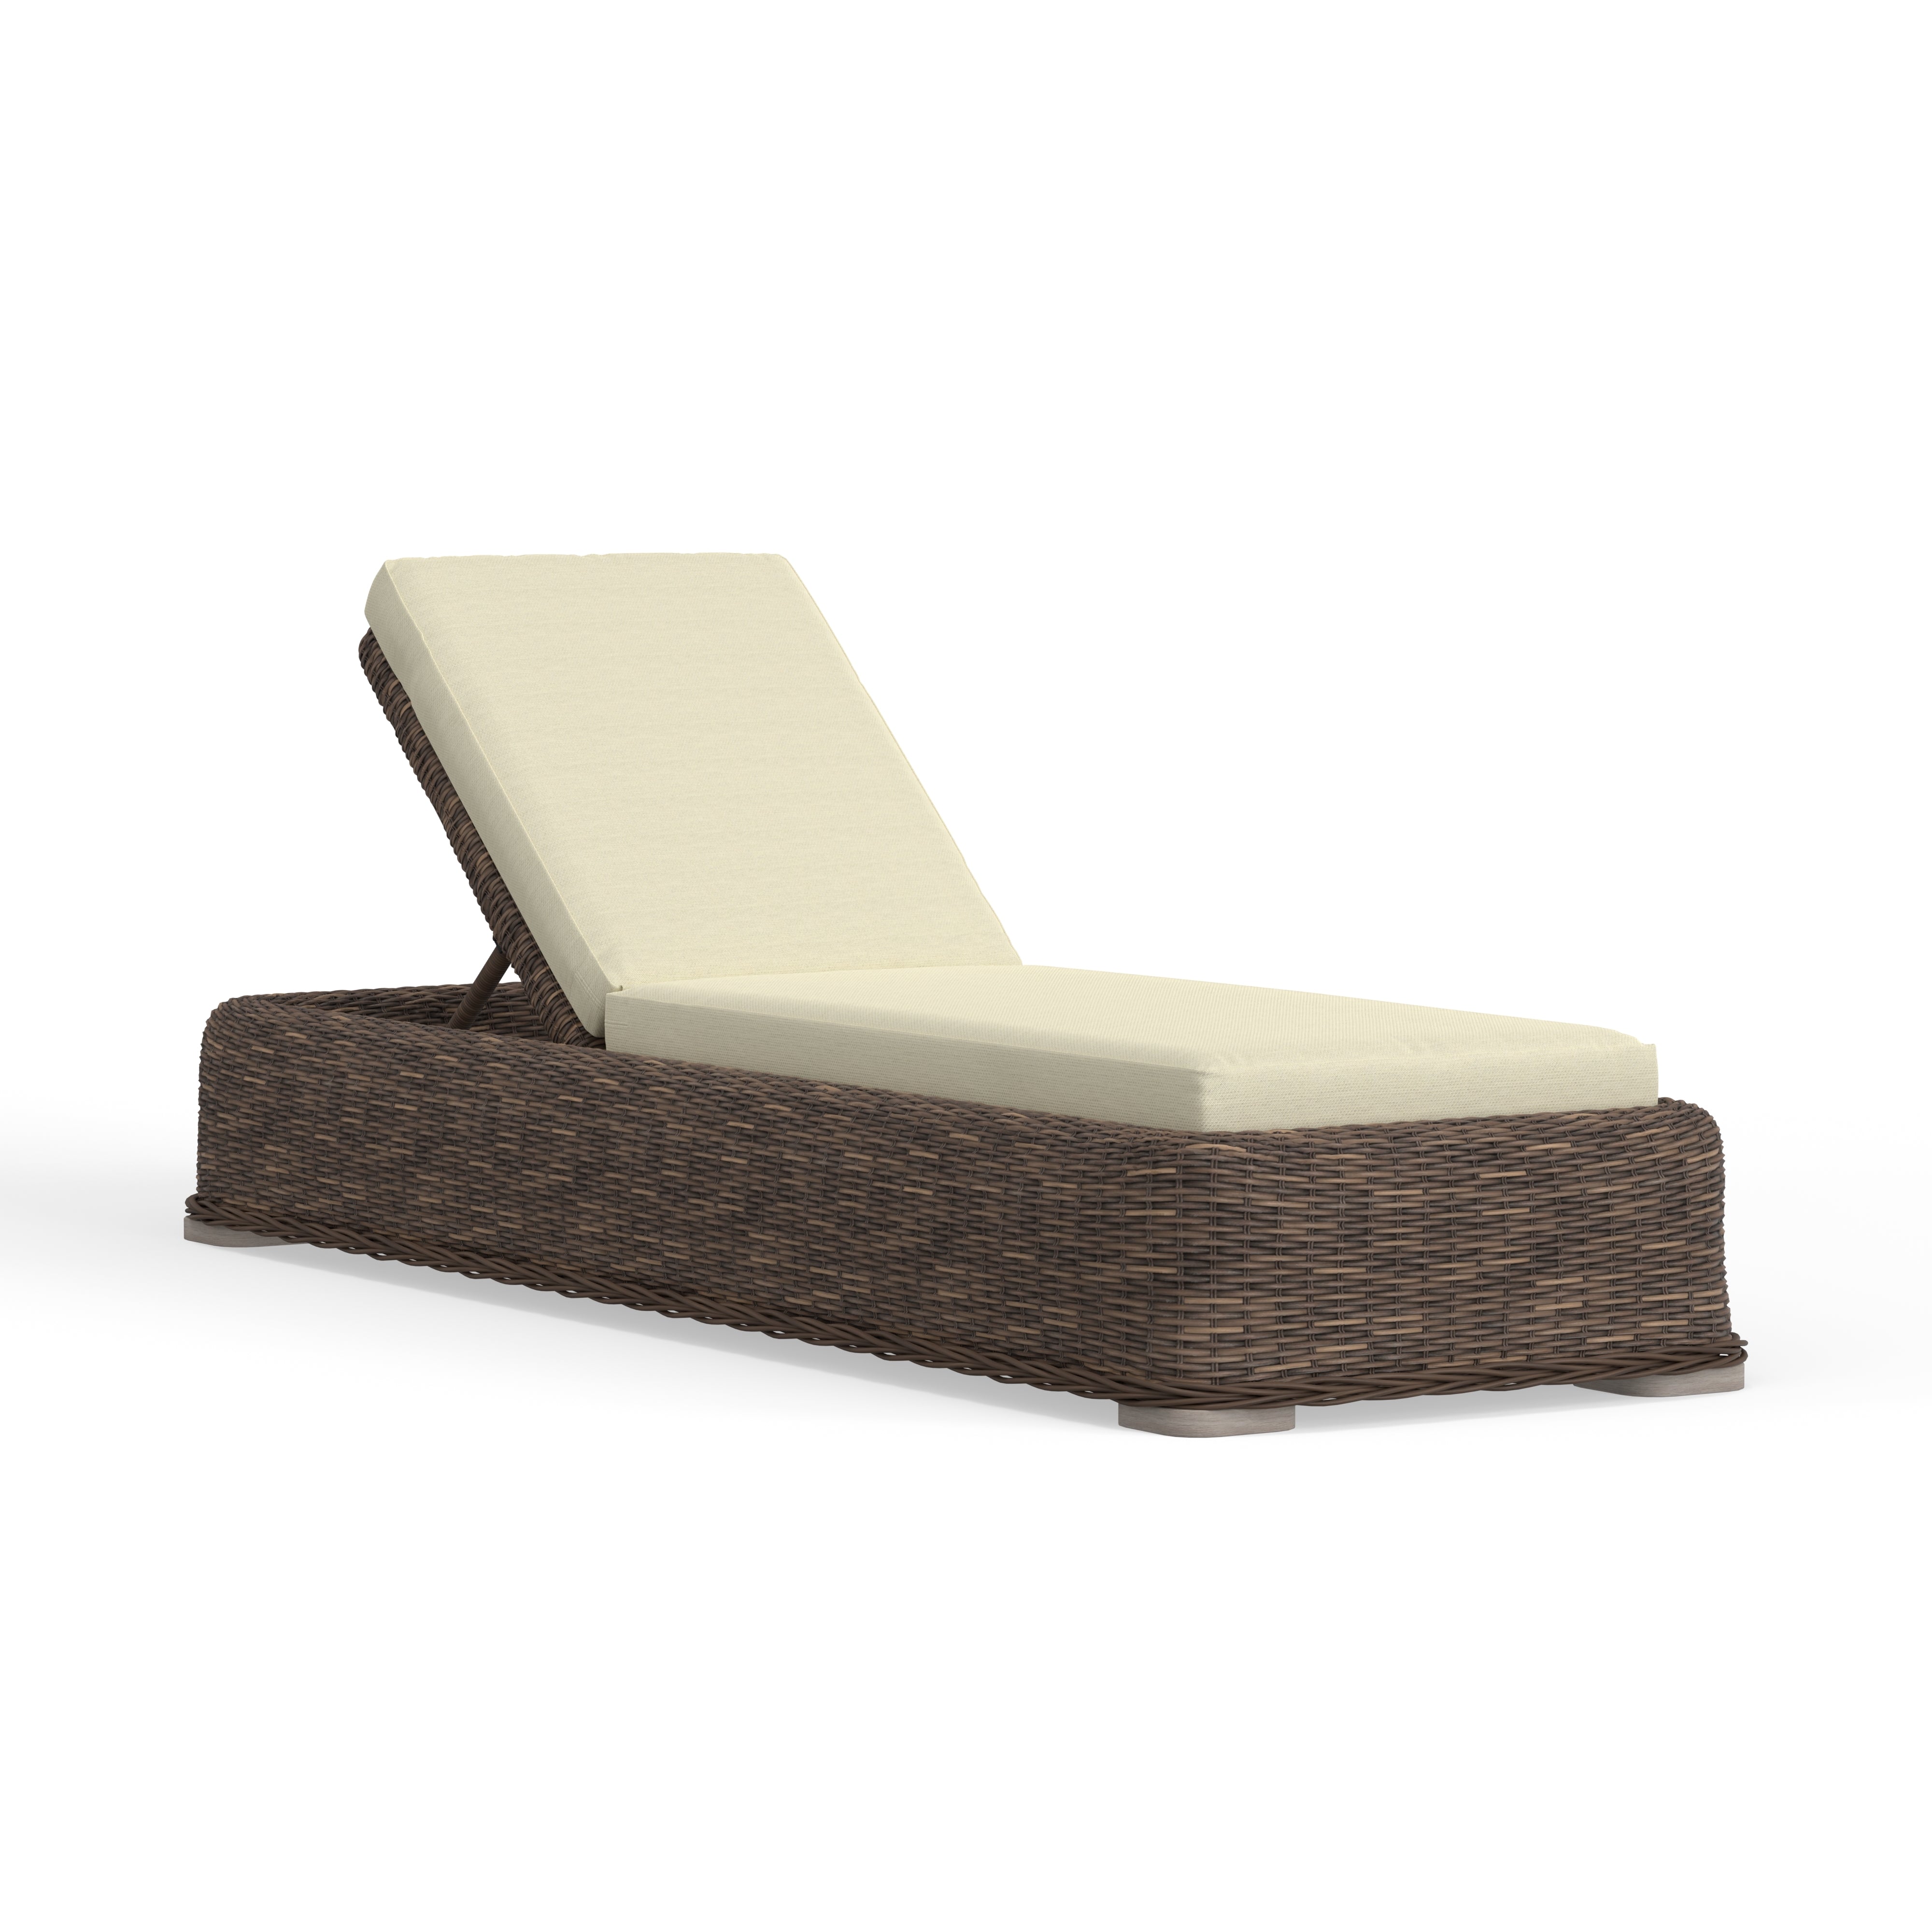 Outdoor Wicker Chaise Lounge With Comfortable Sunbrella Cushions